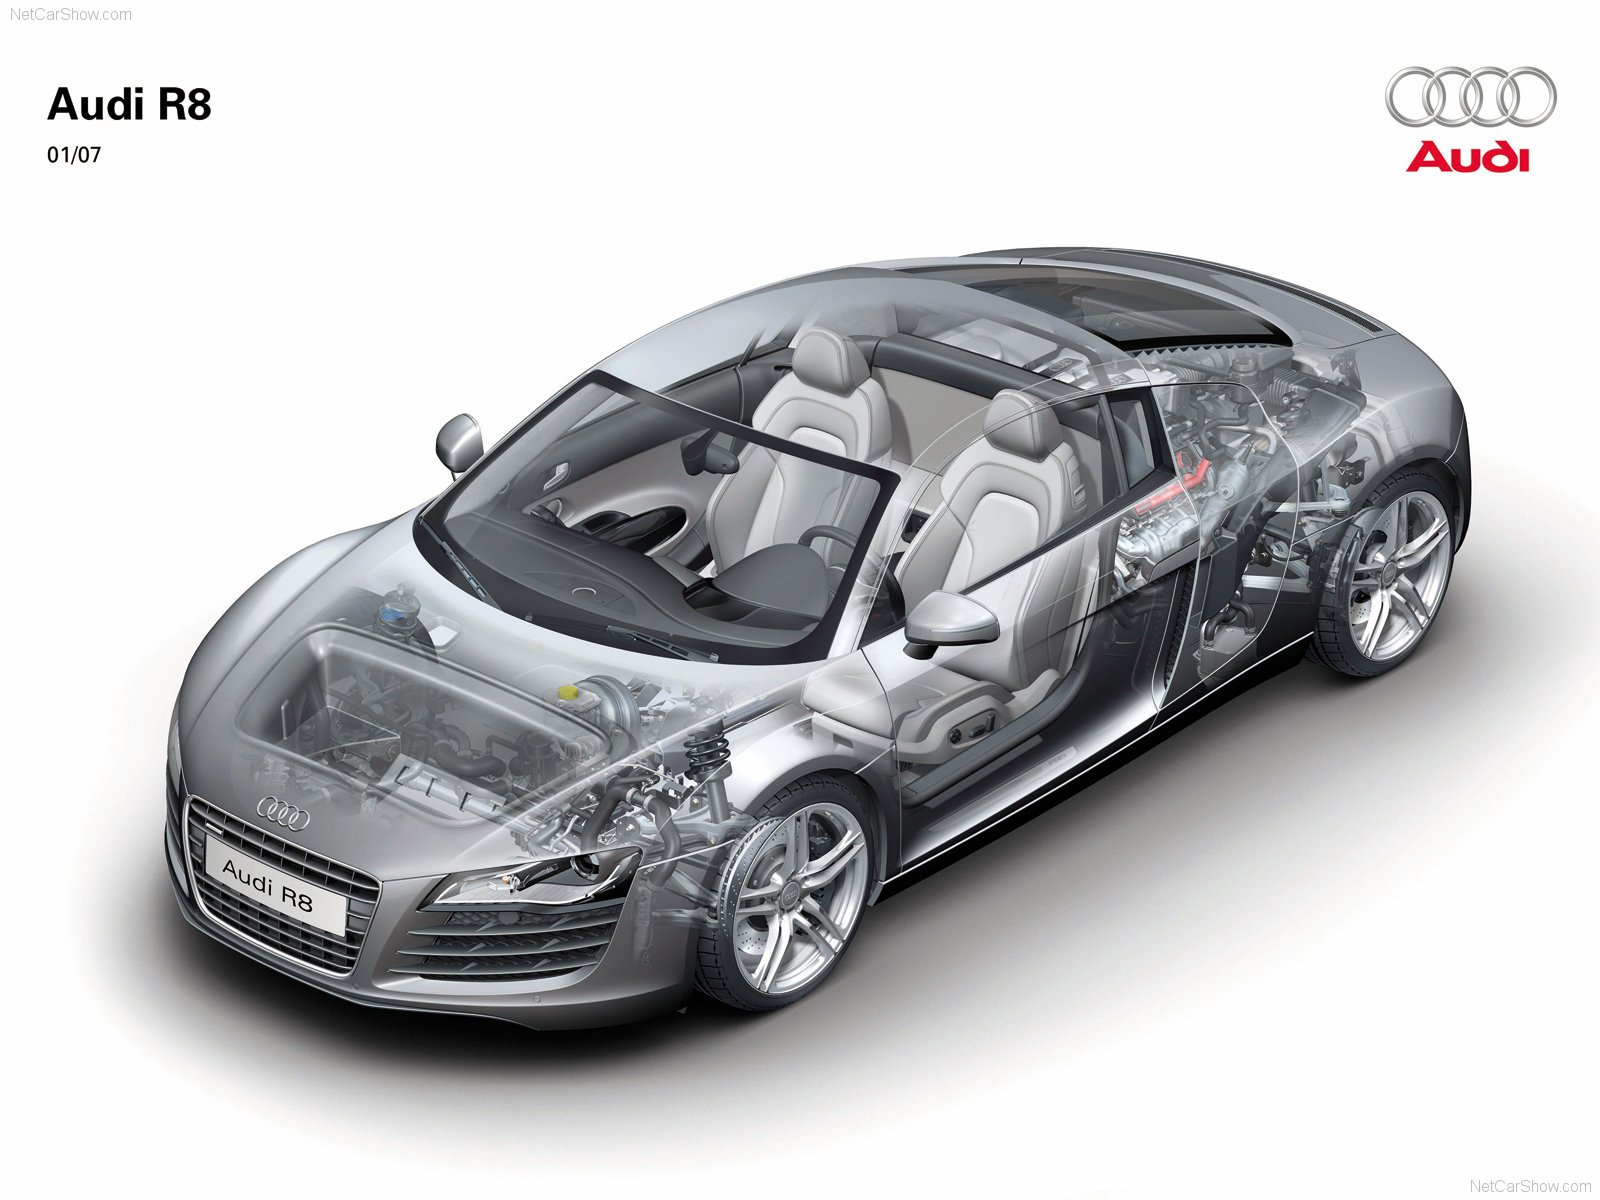 audi, R, 8, 2007, Coupe, Cars, 2007, Technical Wallpaper